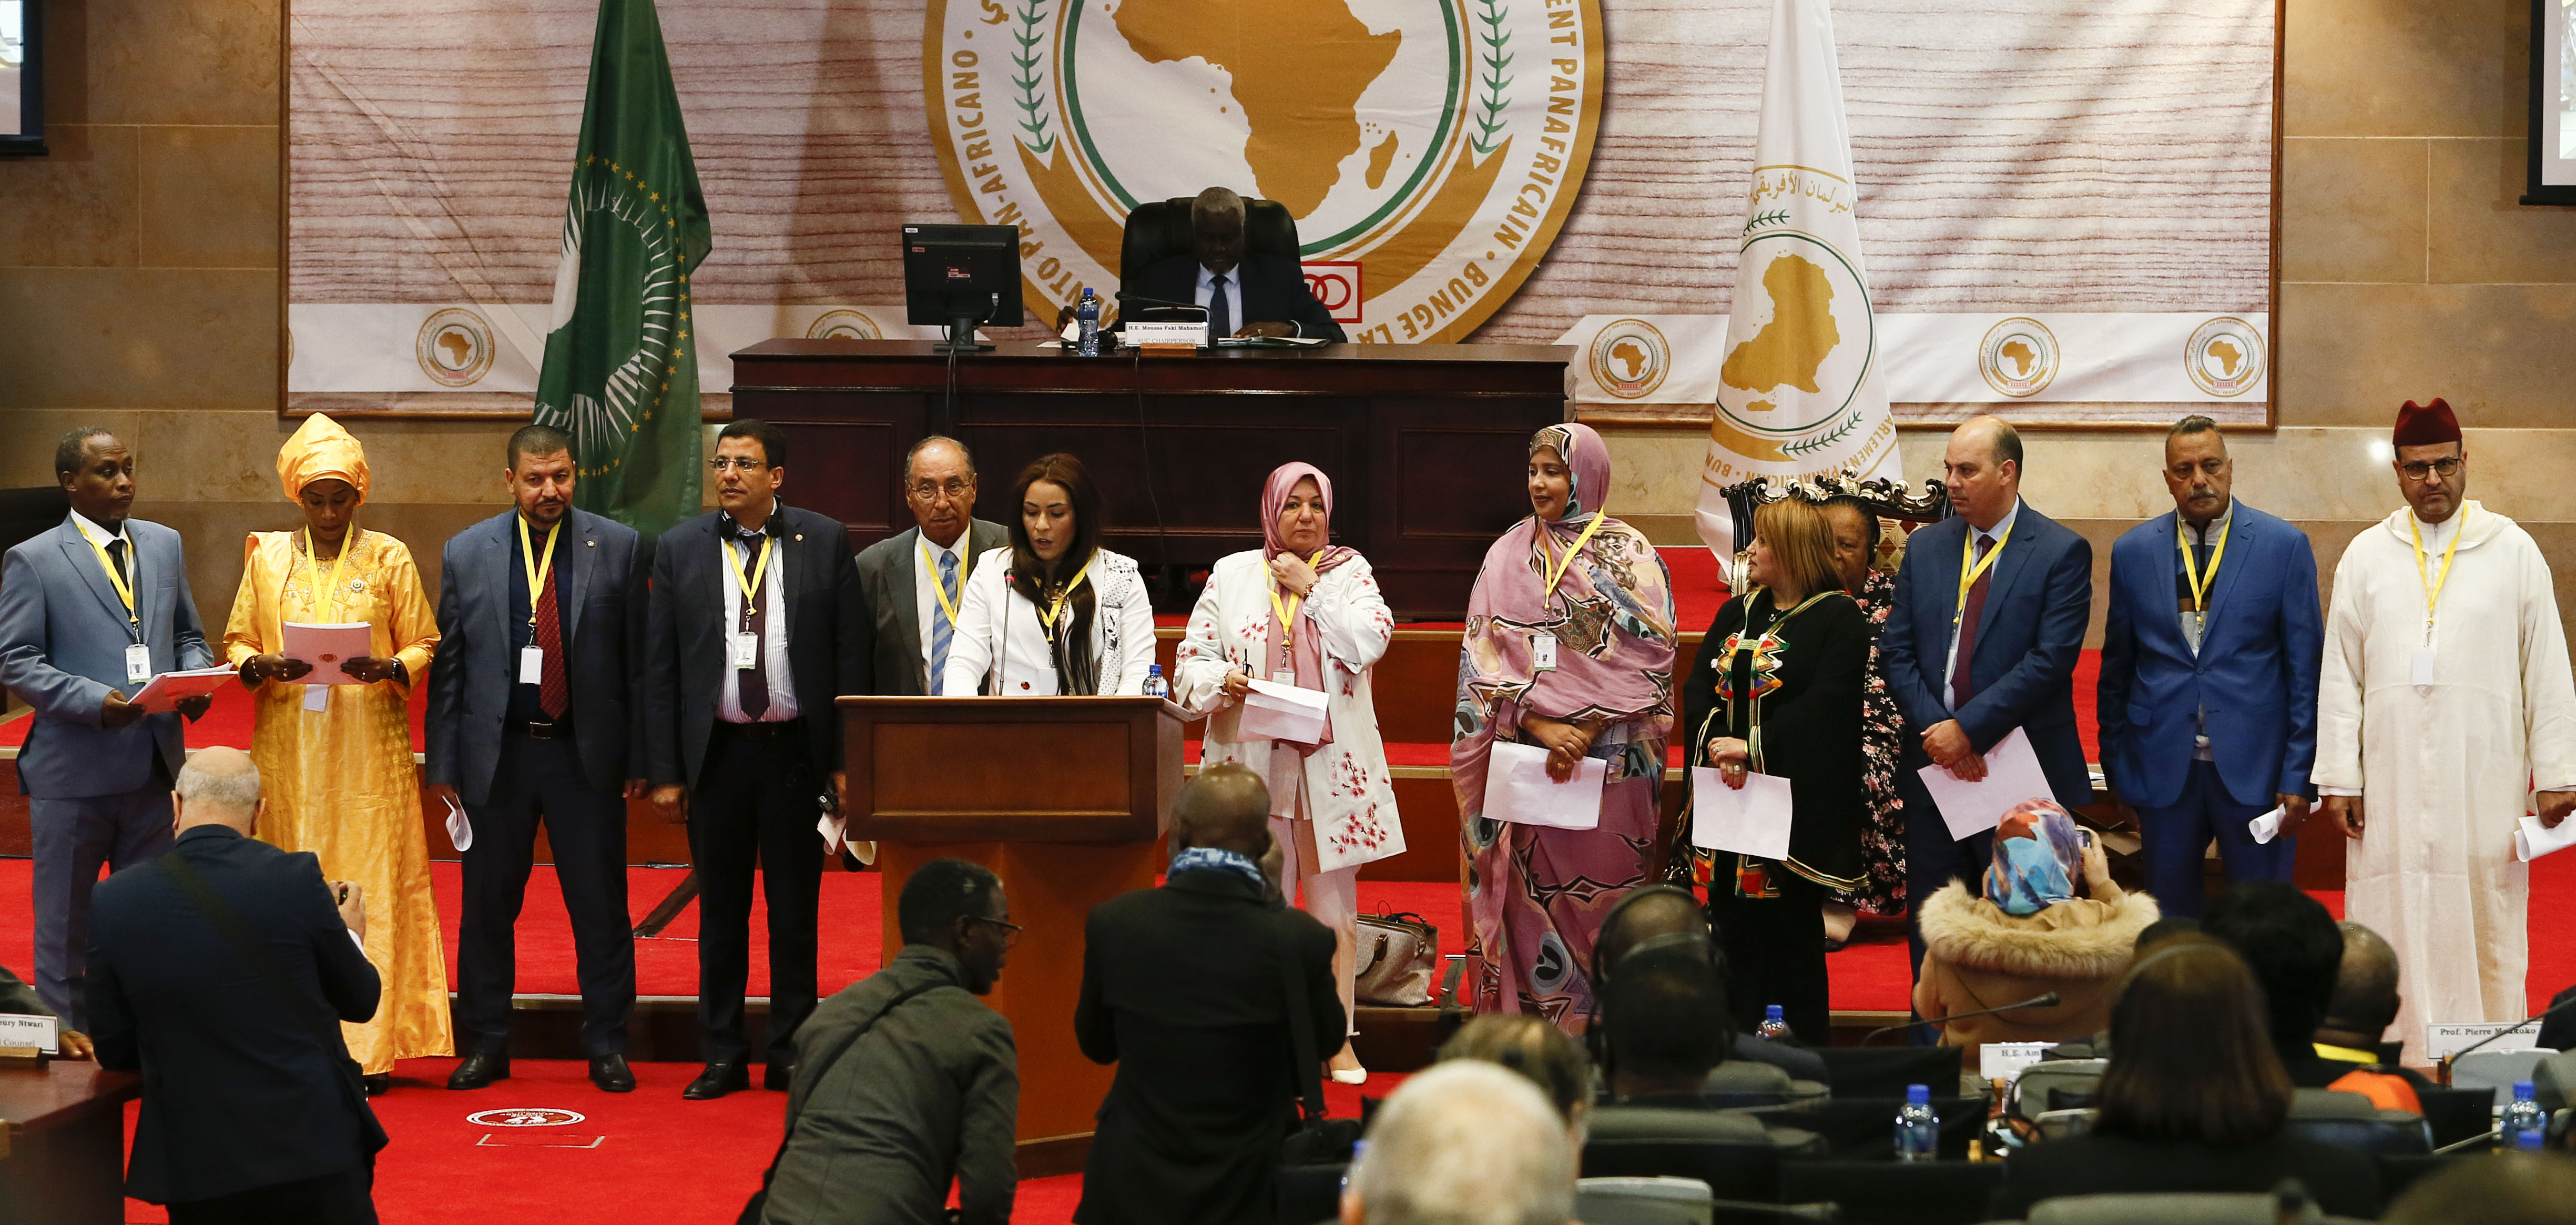 pan-african parliament swearing-in